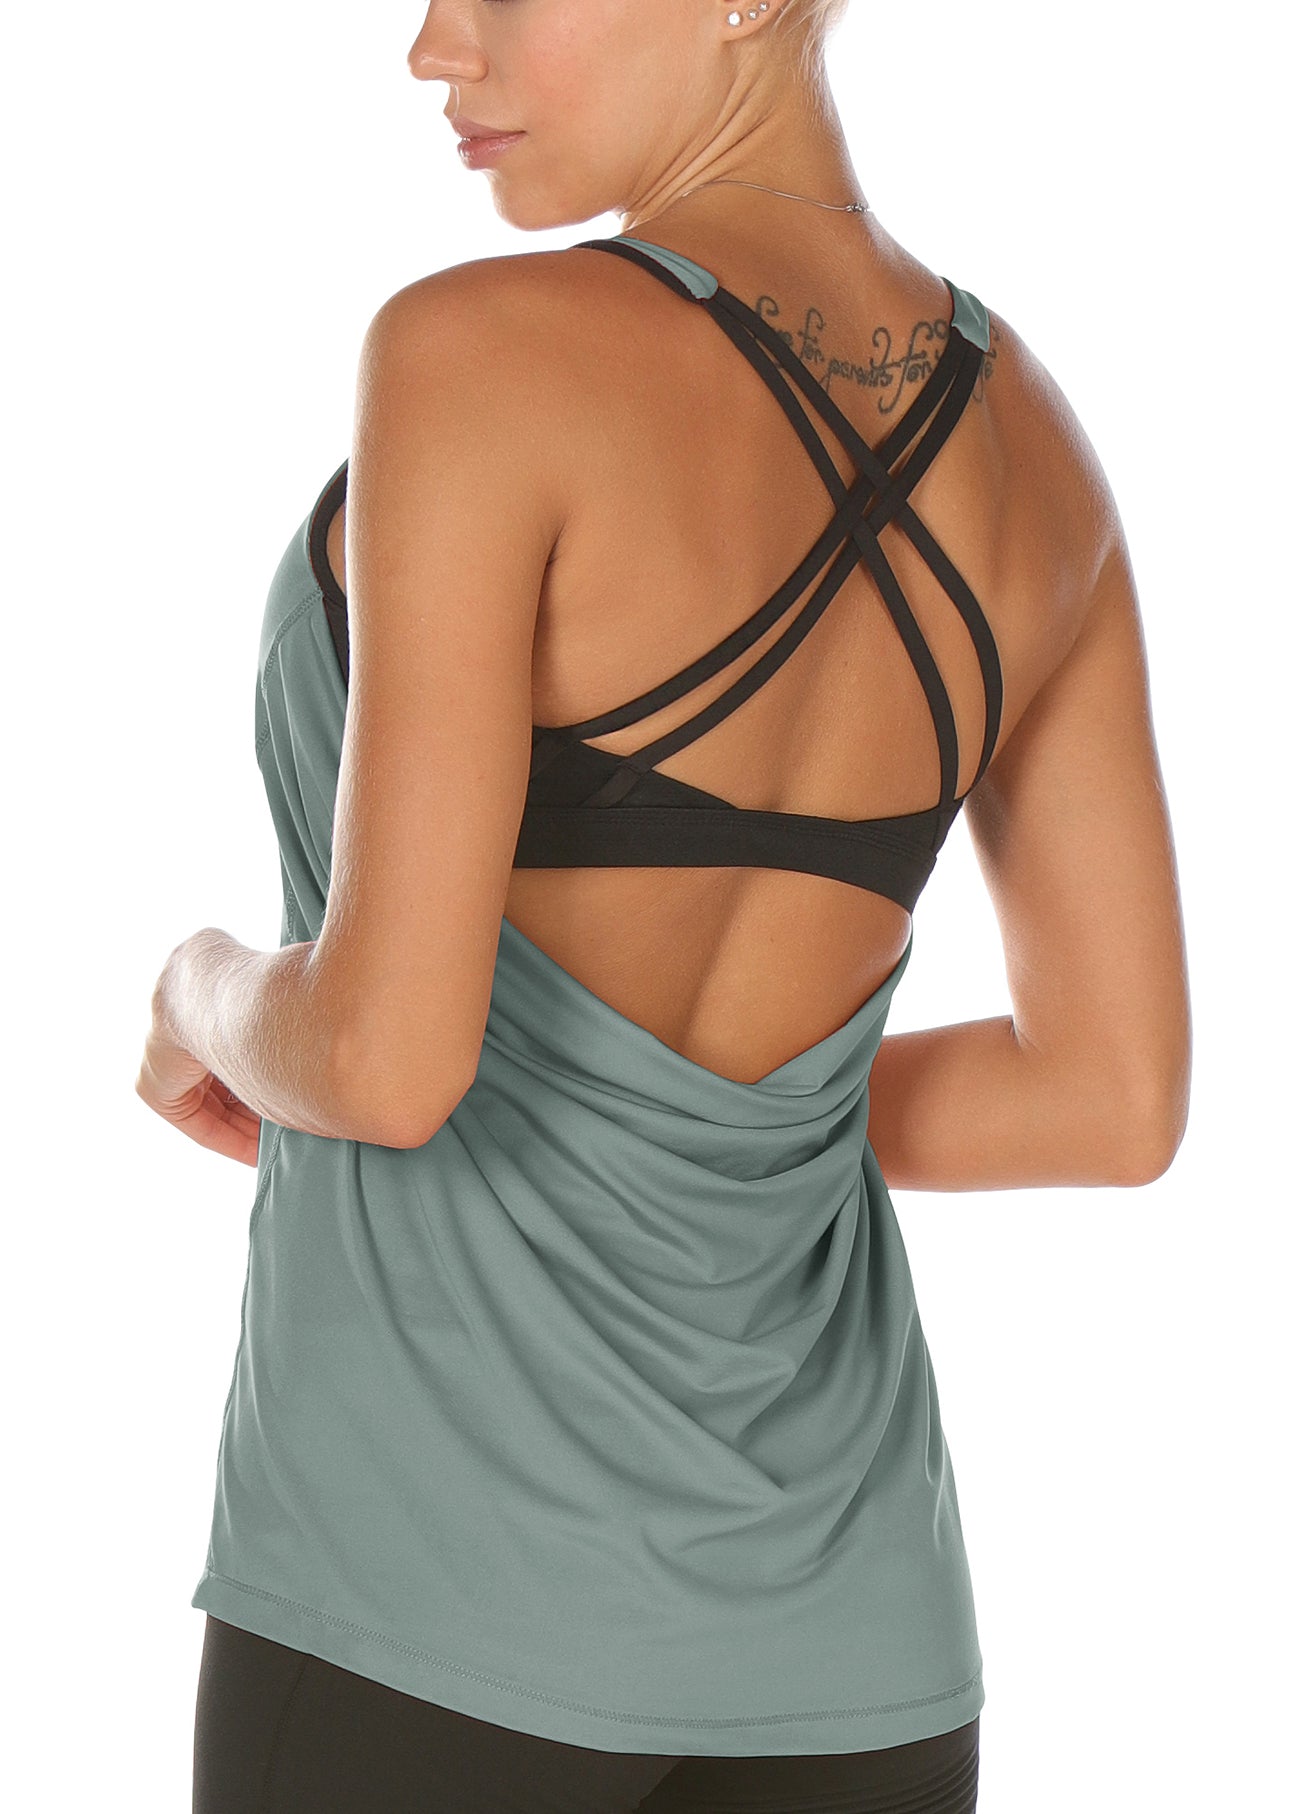 Yoga Top With Built-In Bra